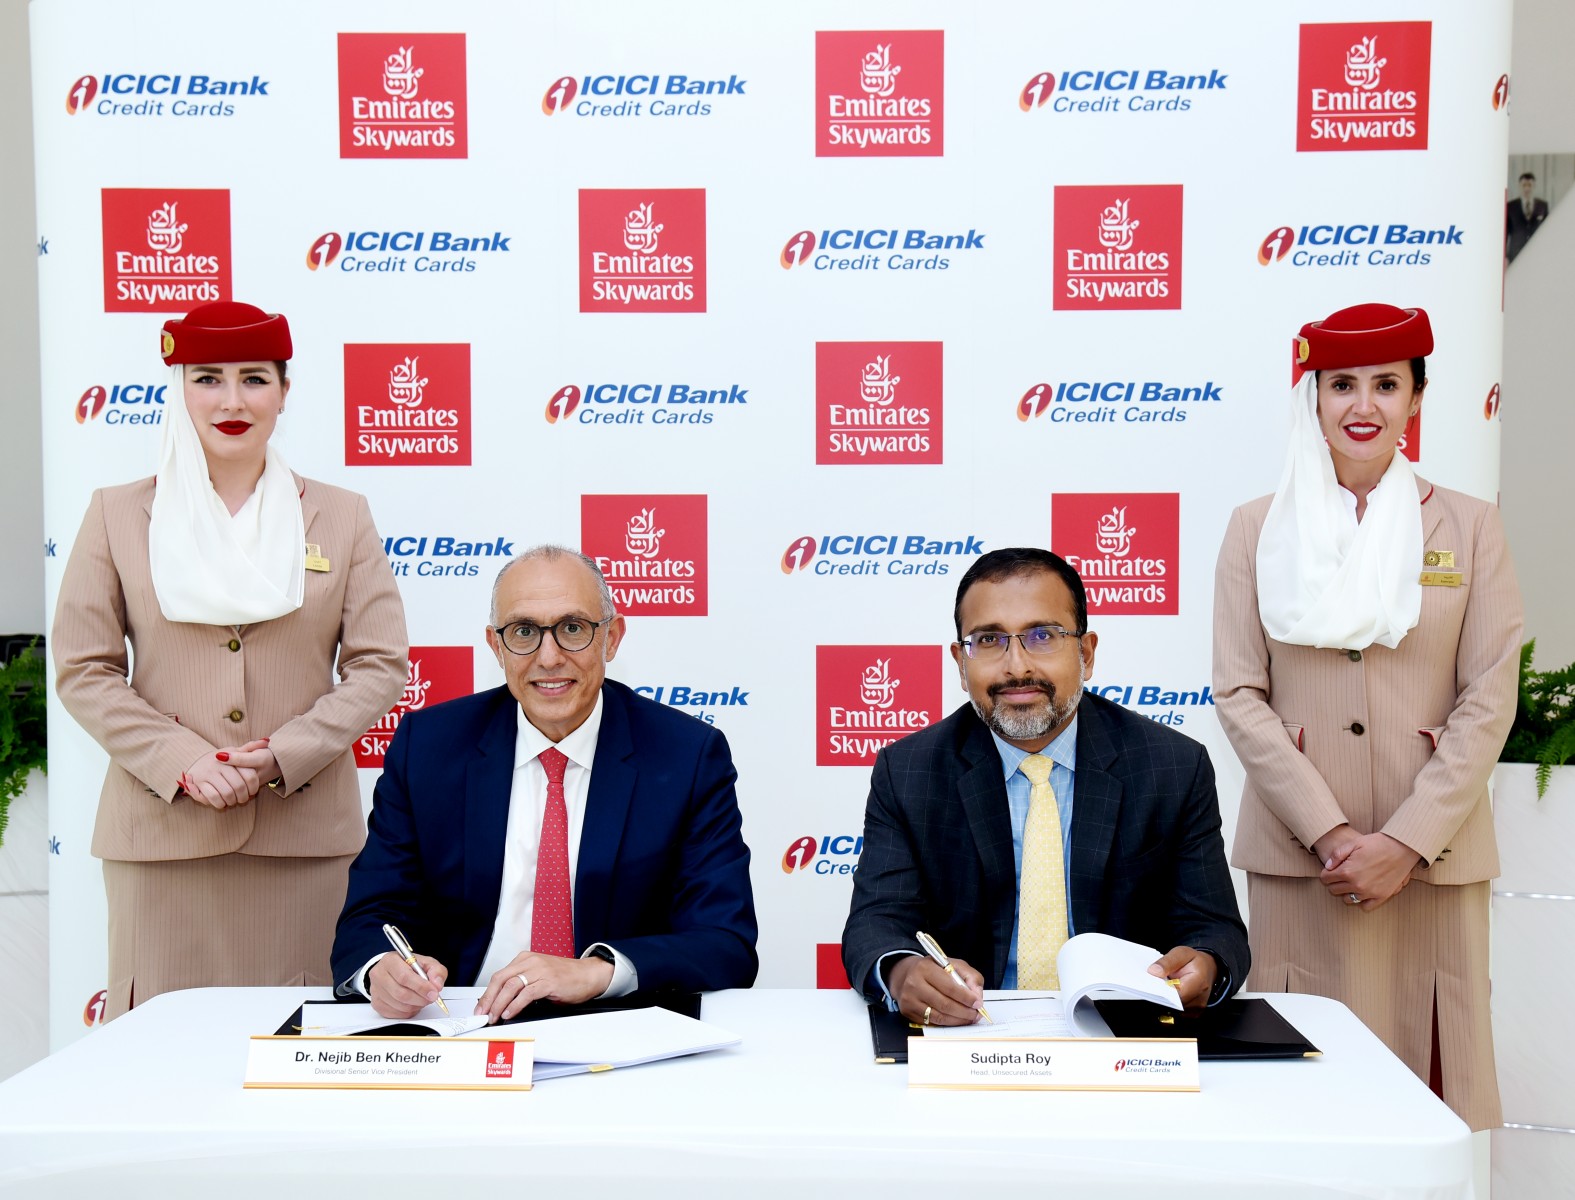 Emirates Skywards ICICI Bank Credit Cards Launch